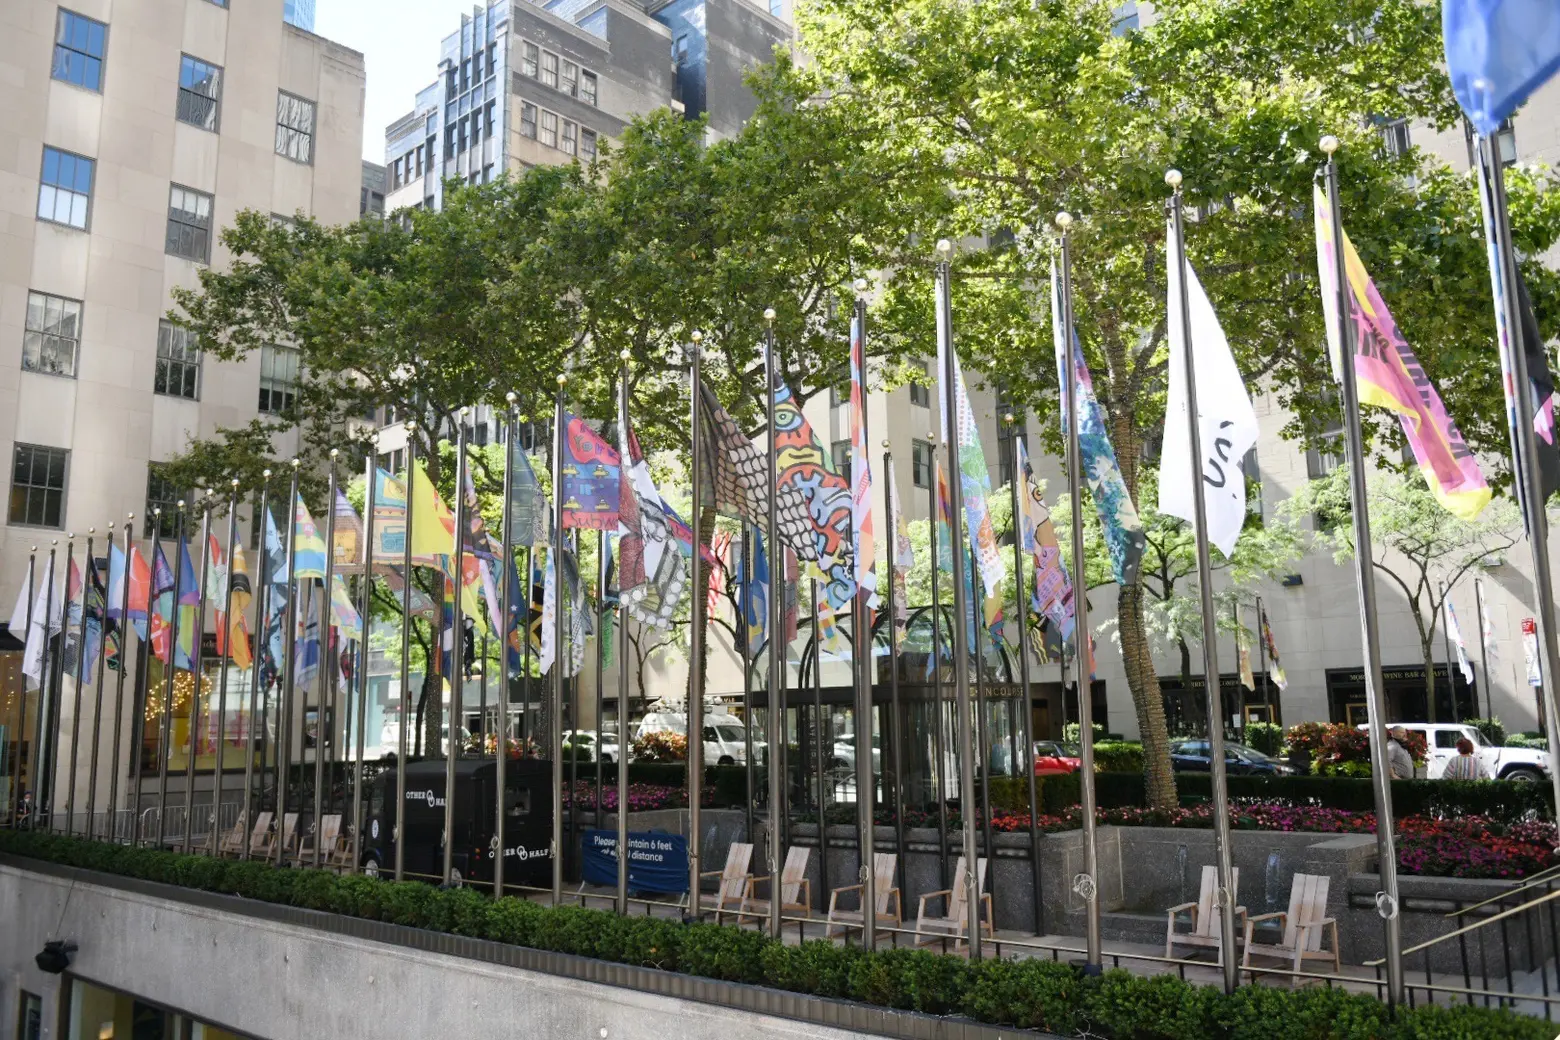 See the 193 new Rockefeller Center flags designed by the public